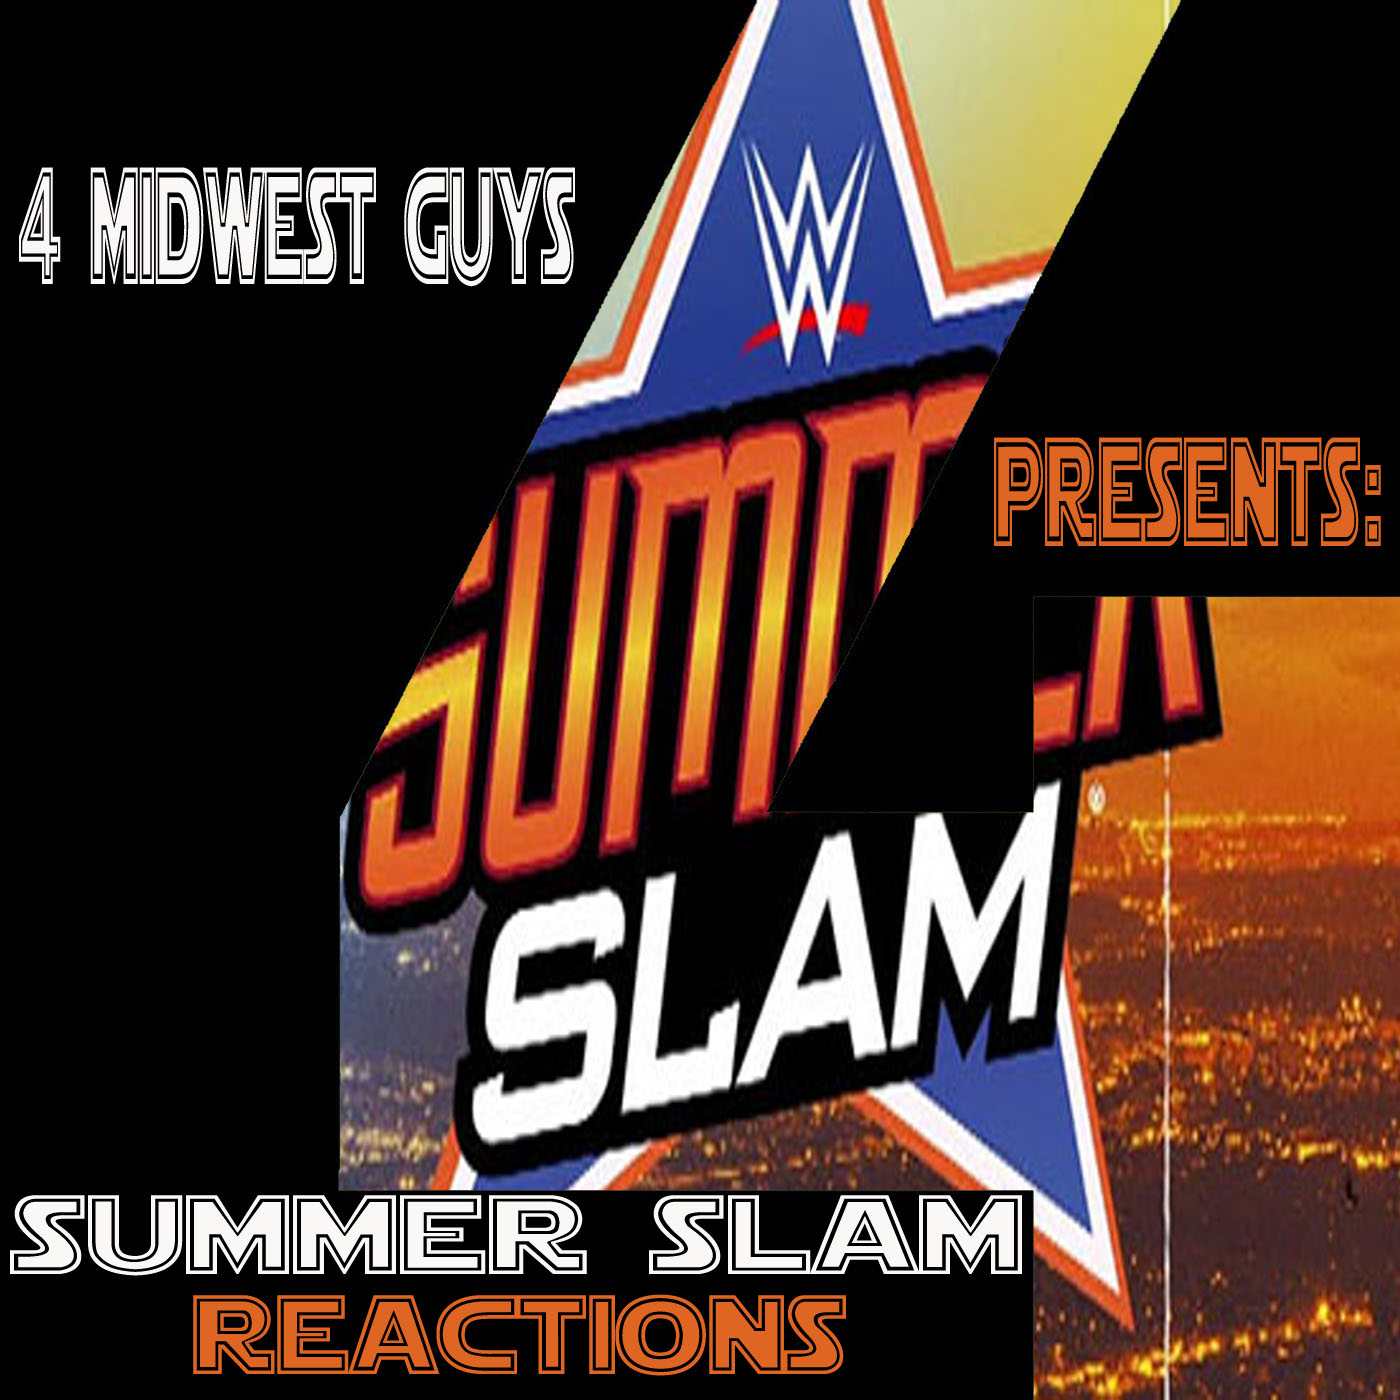 4 MIDWEST GUYS PRESENTS SUMMER SLAM REACTIONS